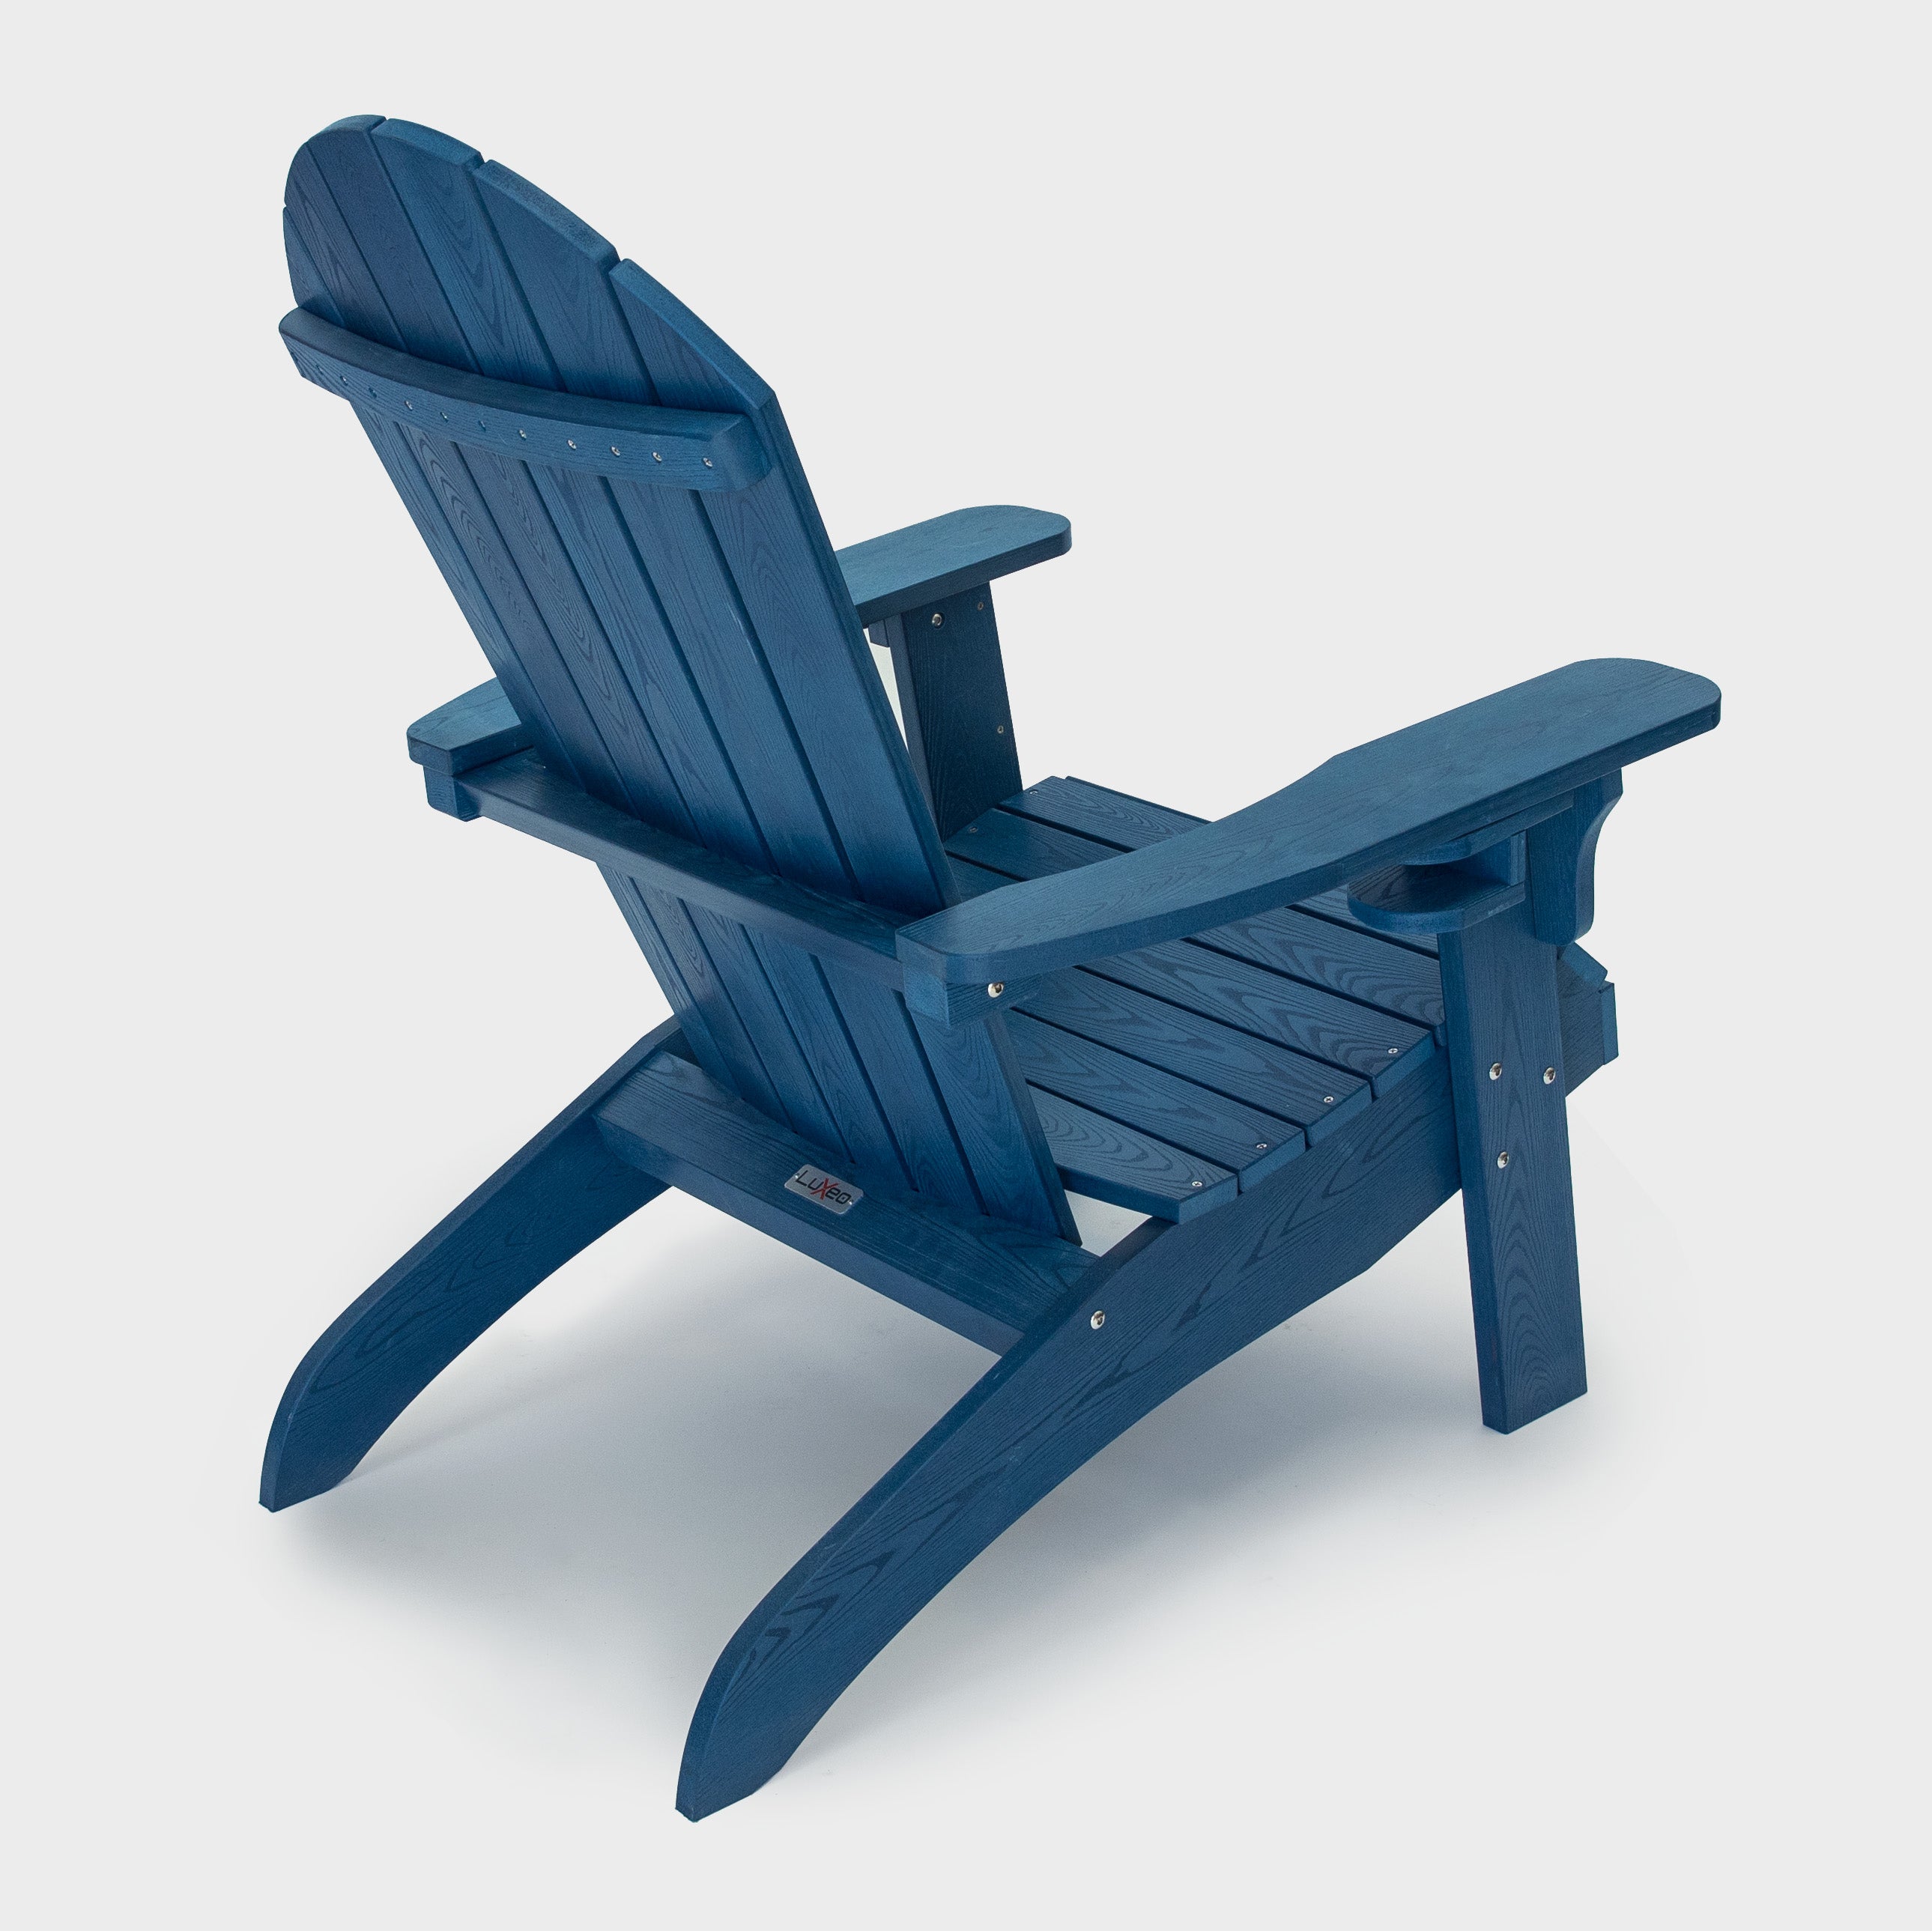 LuXeo Westwood All Weather Outdoor Patio Adirondack Chair